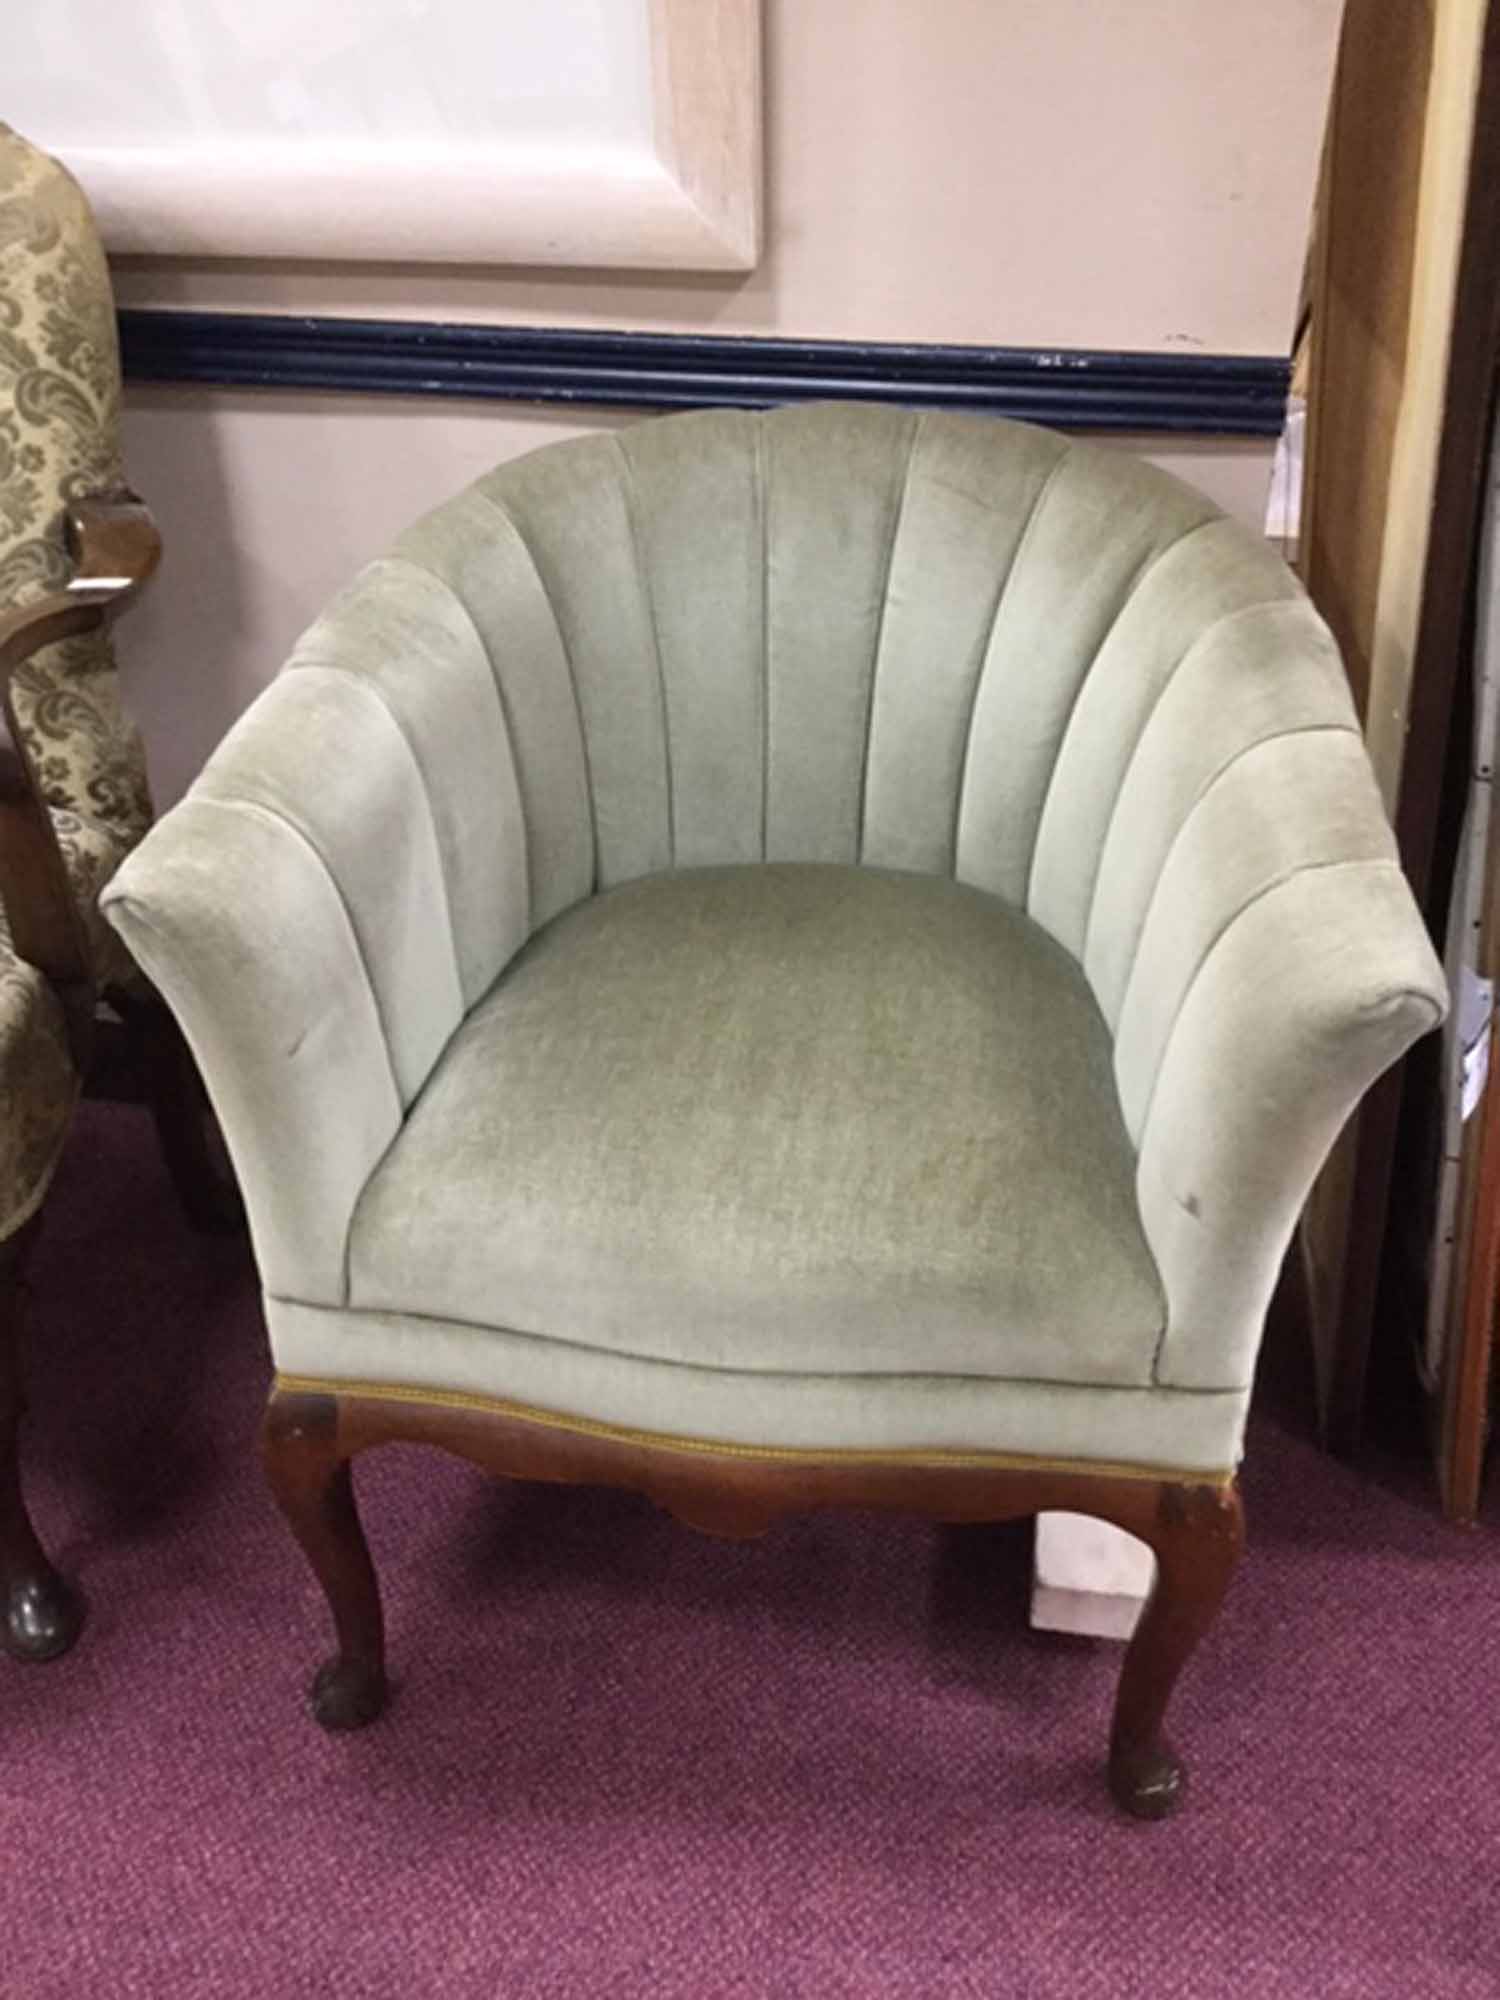 MAHOGANY FRAMED SHELL-BACKED TUB CHAIR IN THE ART DECO STYLE upholstered in pale green velour,